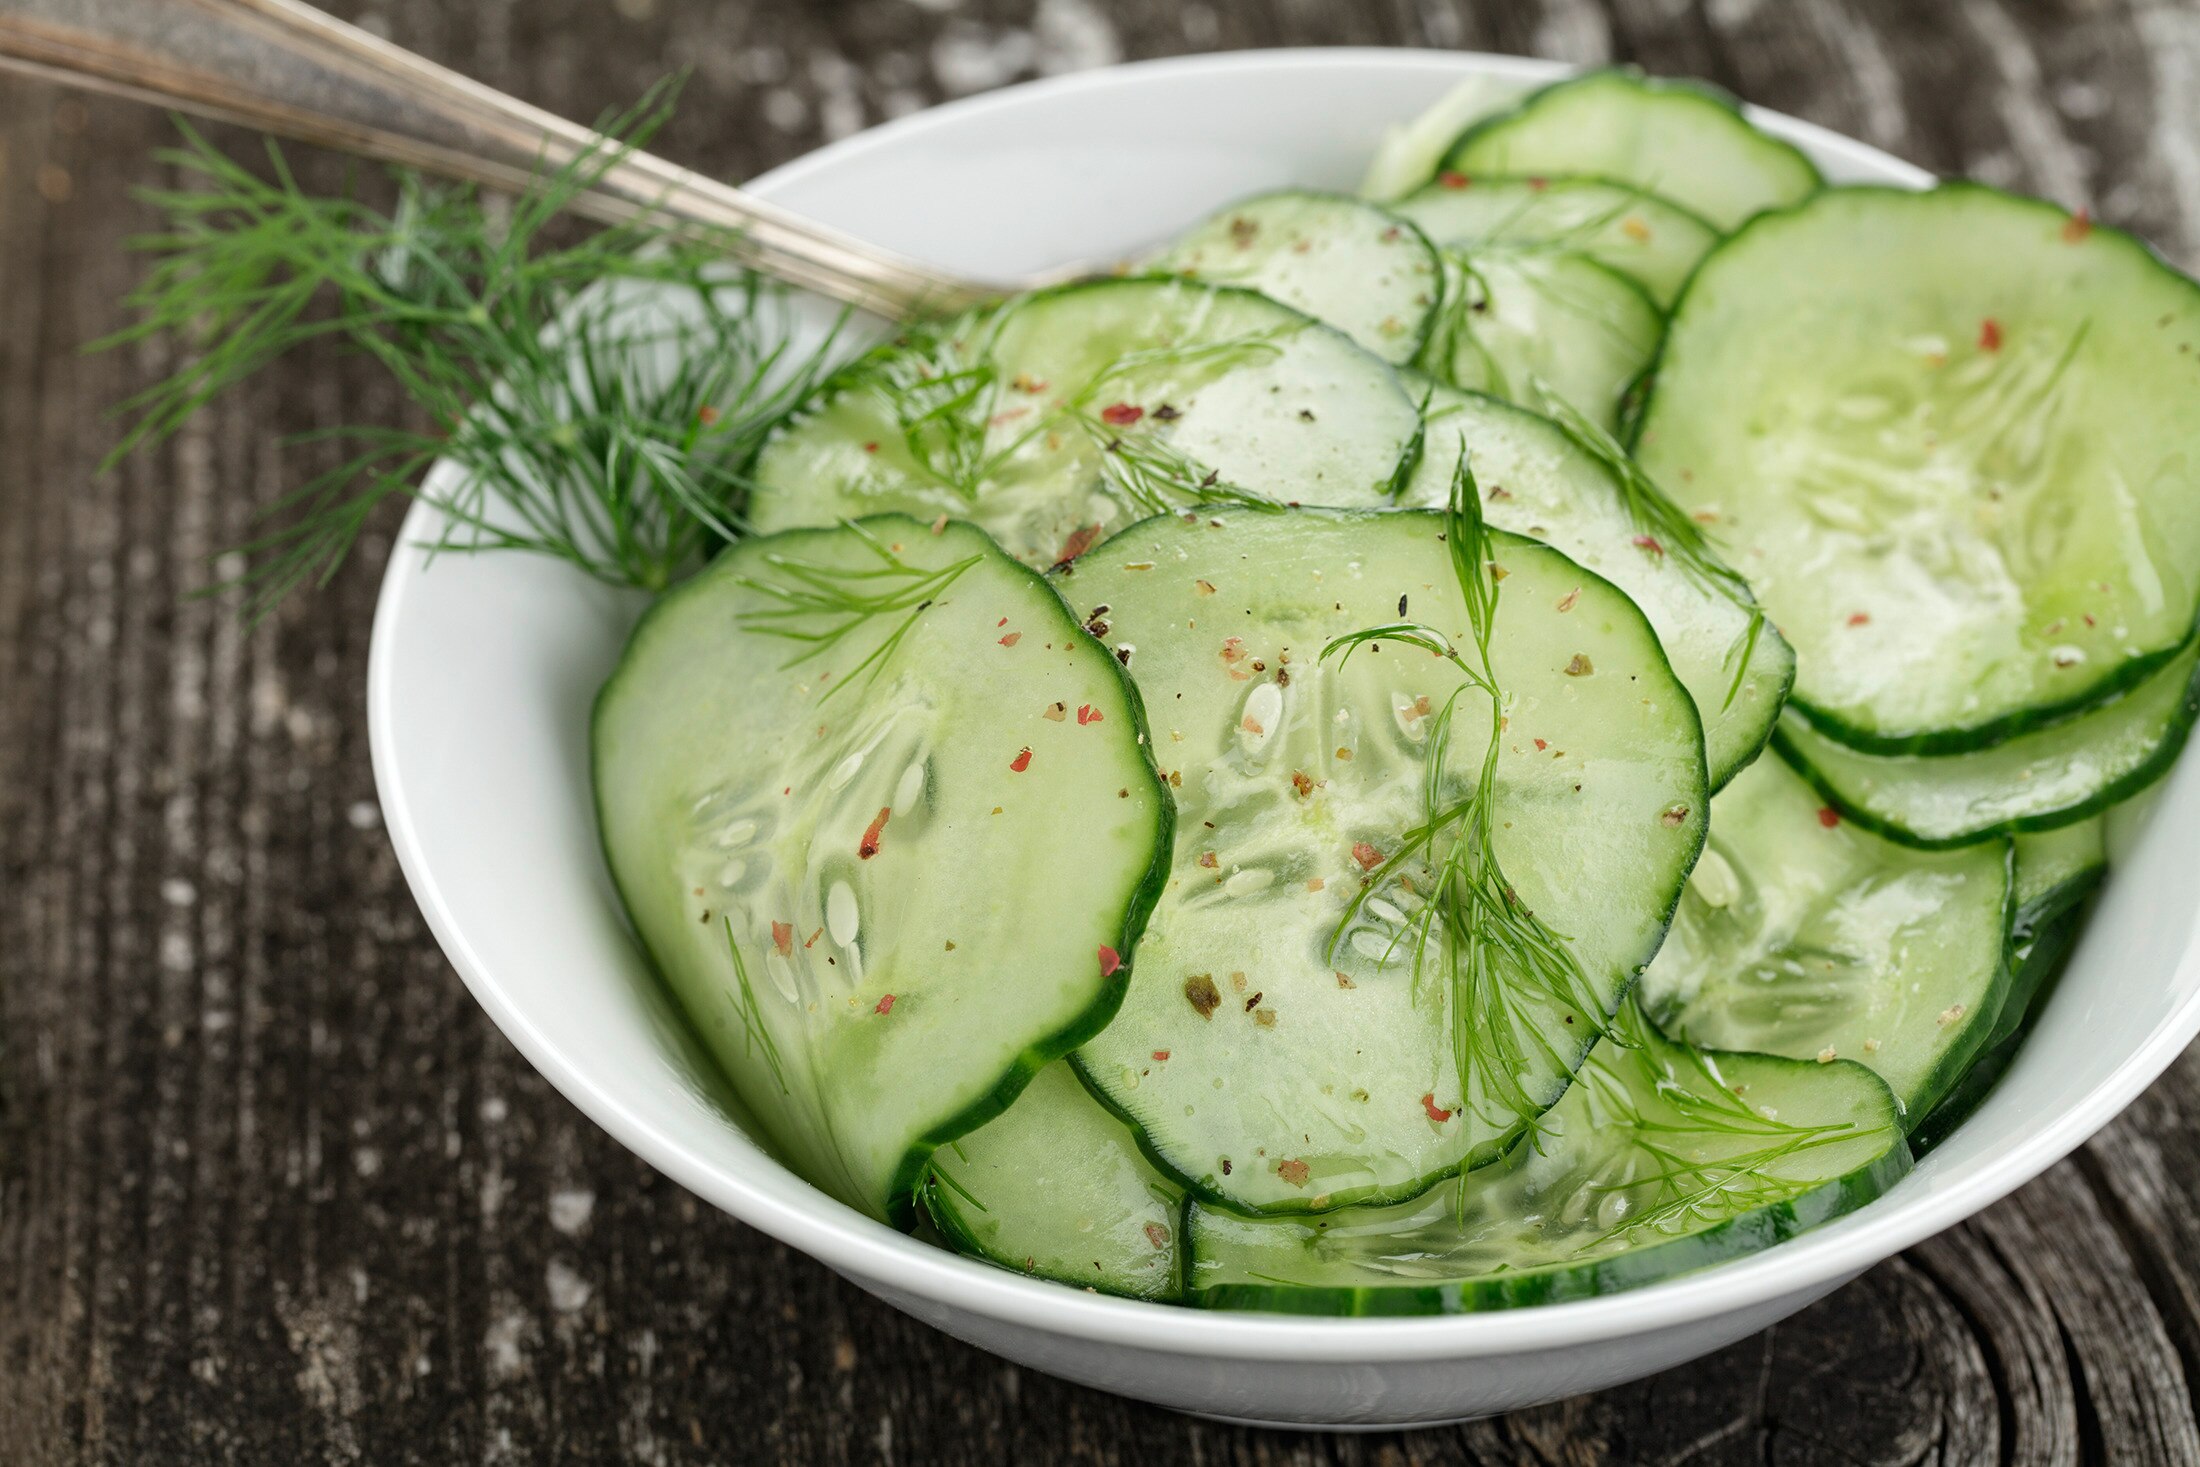 A bowl of thinly sliced cucumber with a simple vinegar dressing